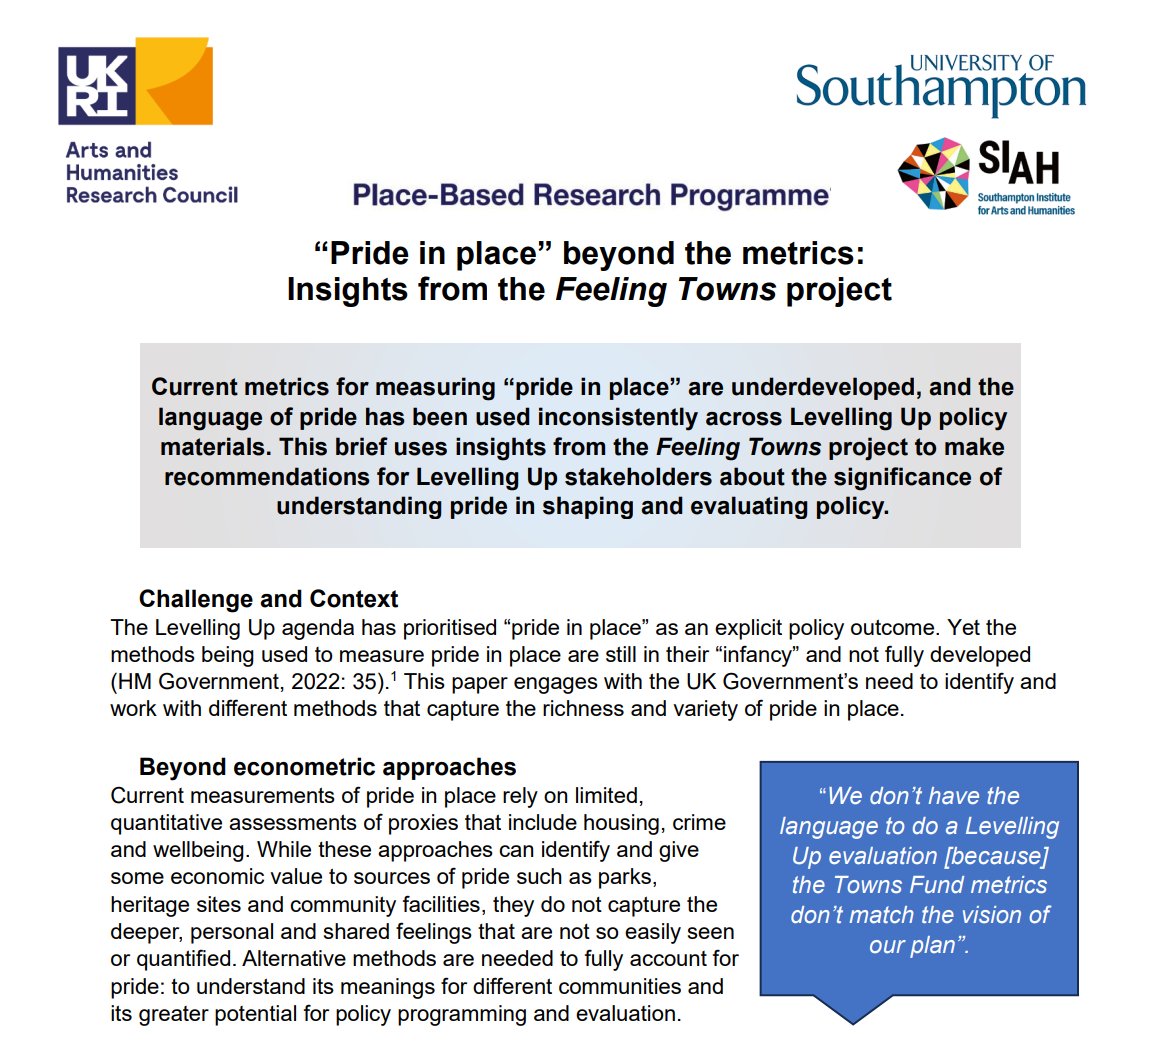 1/2. 🌞With @Soton_SIAH we have published the first of our @ahrcpress Place Programme Policy Briefs about the significance of understanding 'pride in place' in shaping & evaluating Levelling Up policy. Read/download here: gla.ac.uk/media/Media_10…